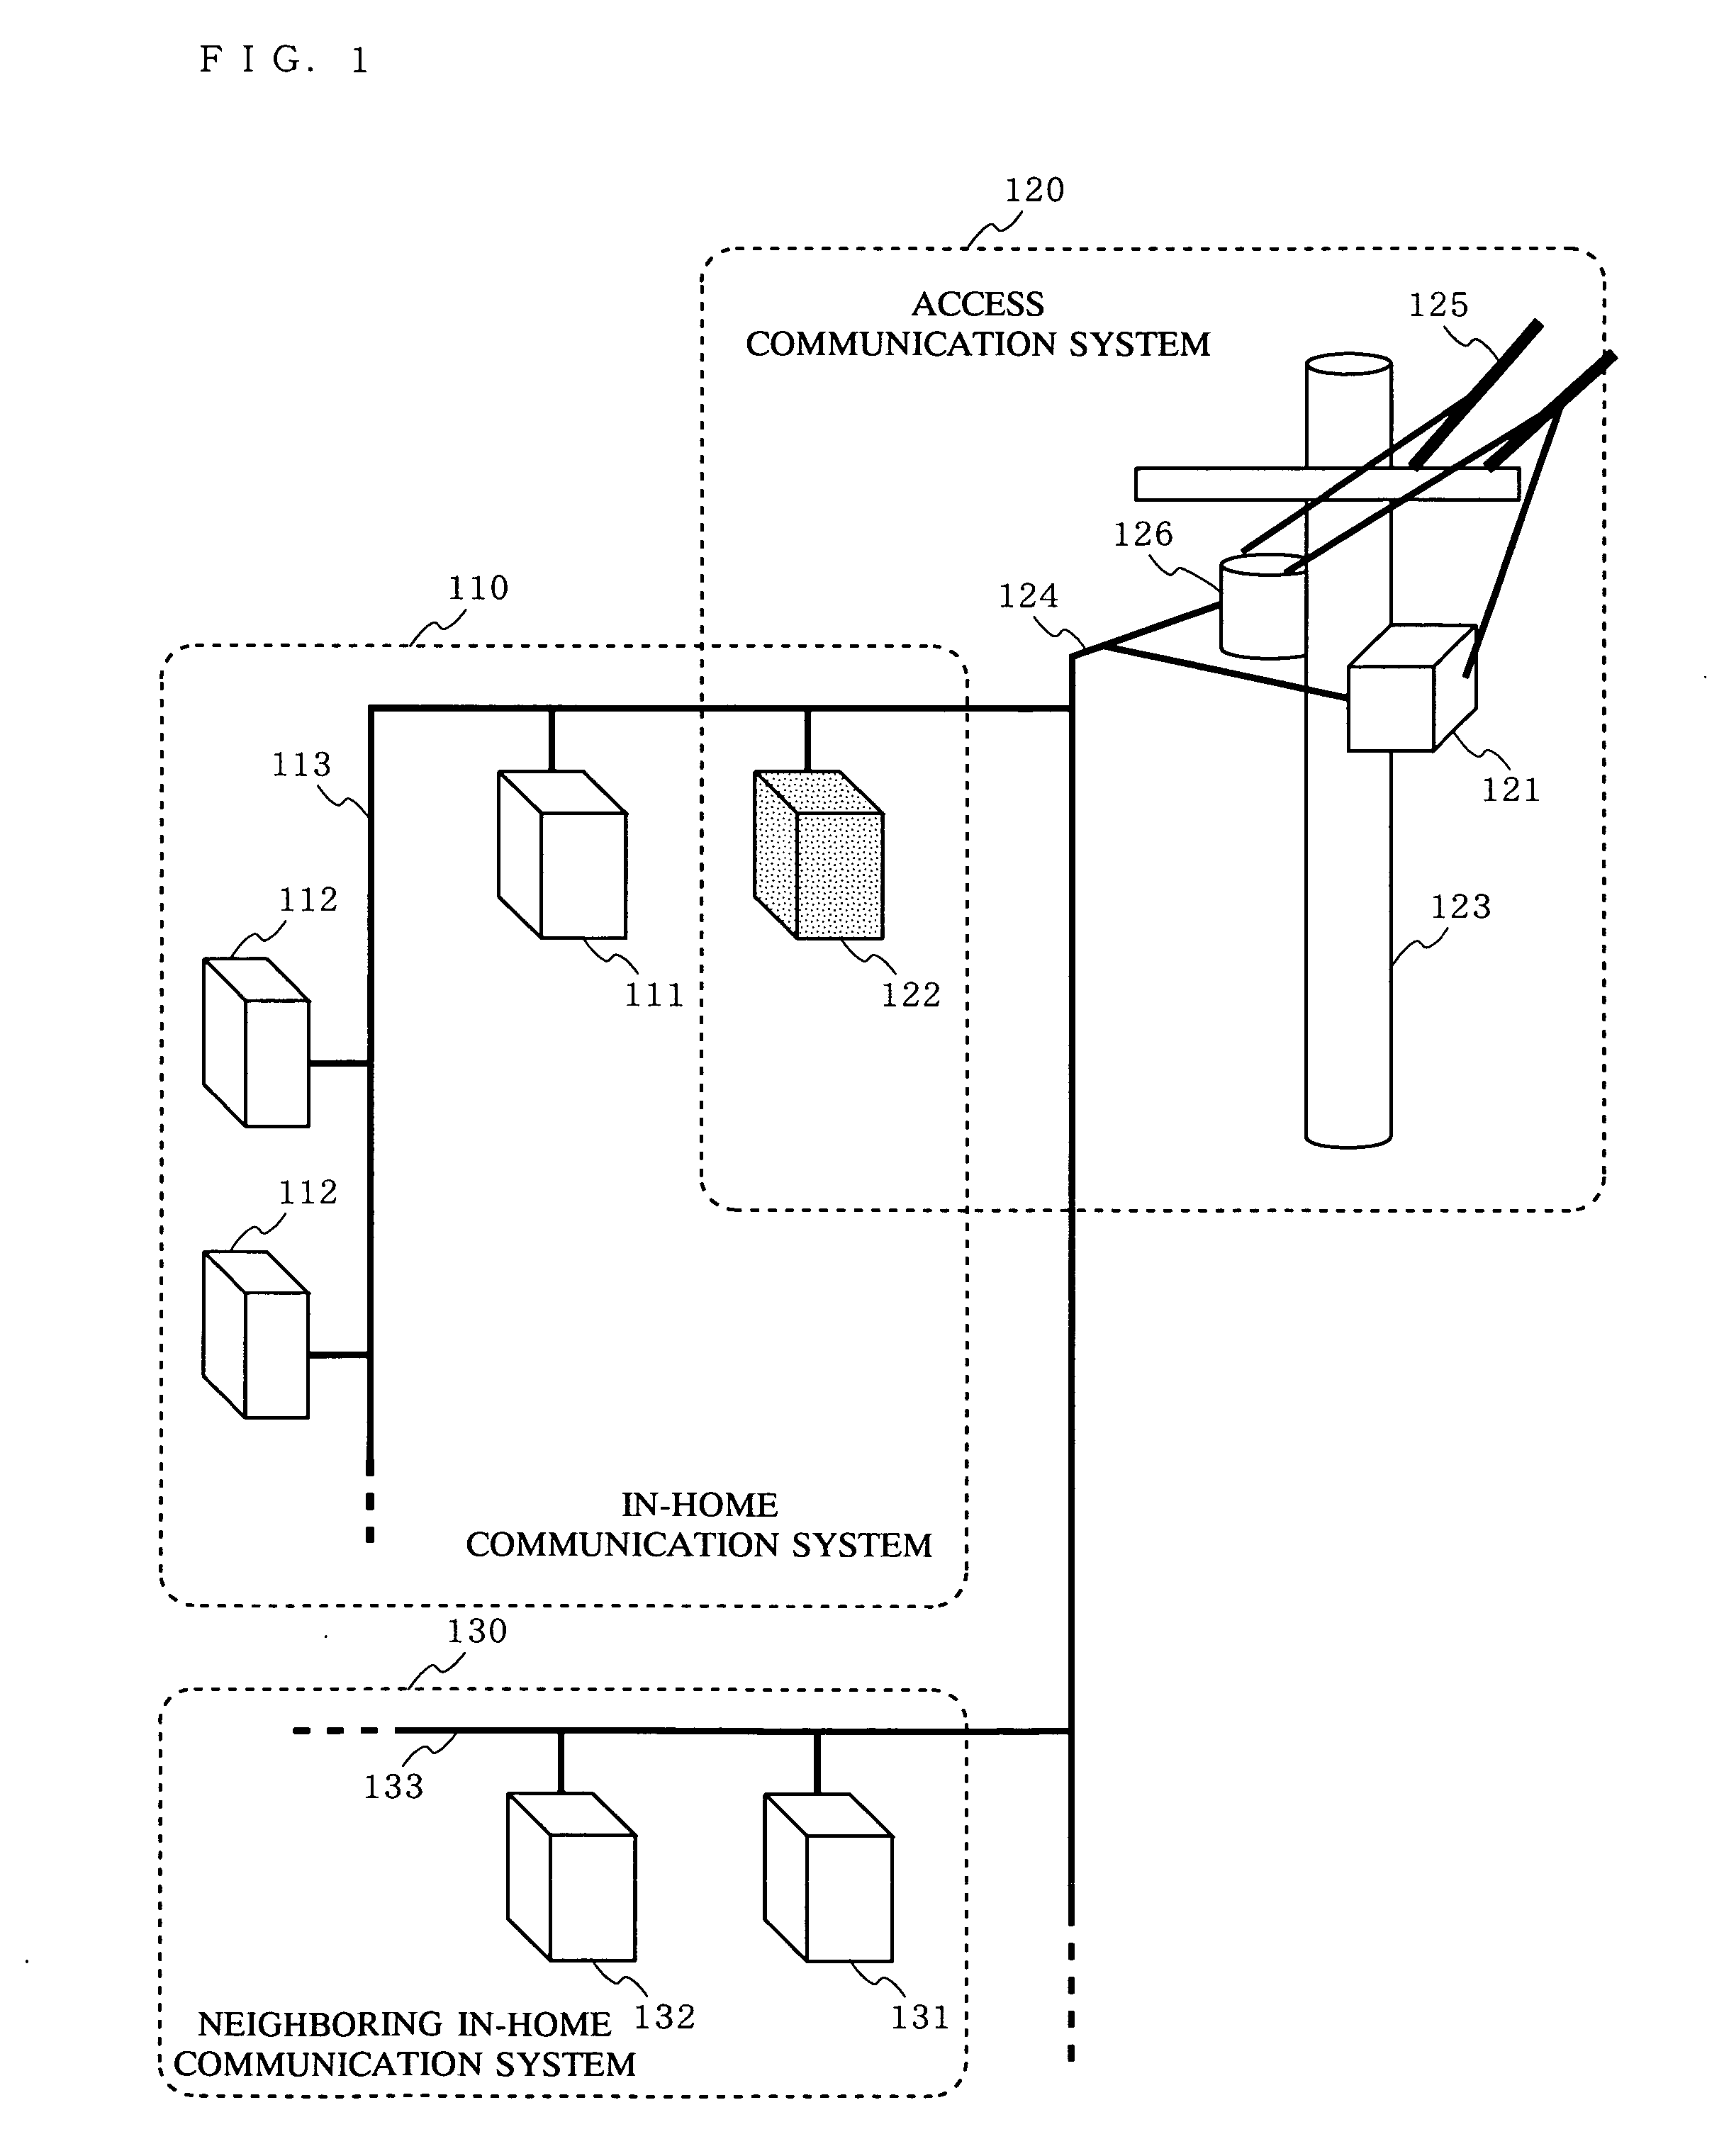 Communication apparatus and coexistence method for enabling coexistence of communication systems